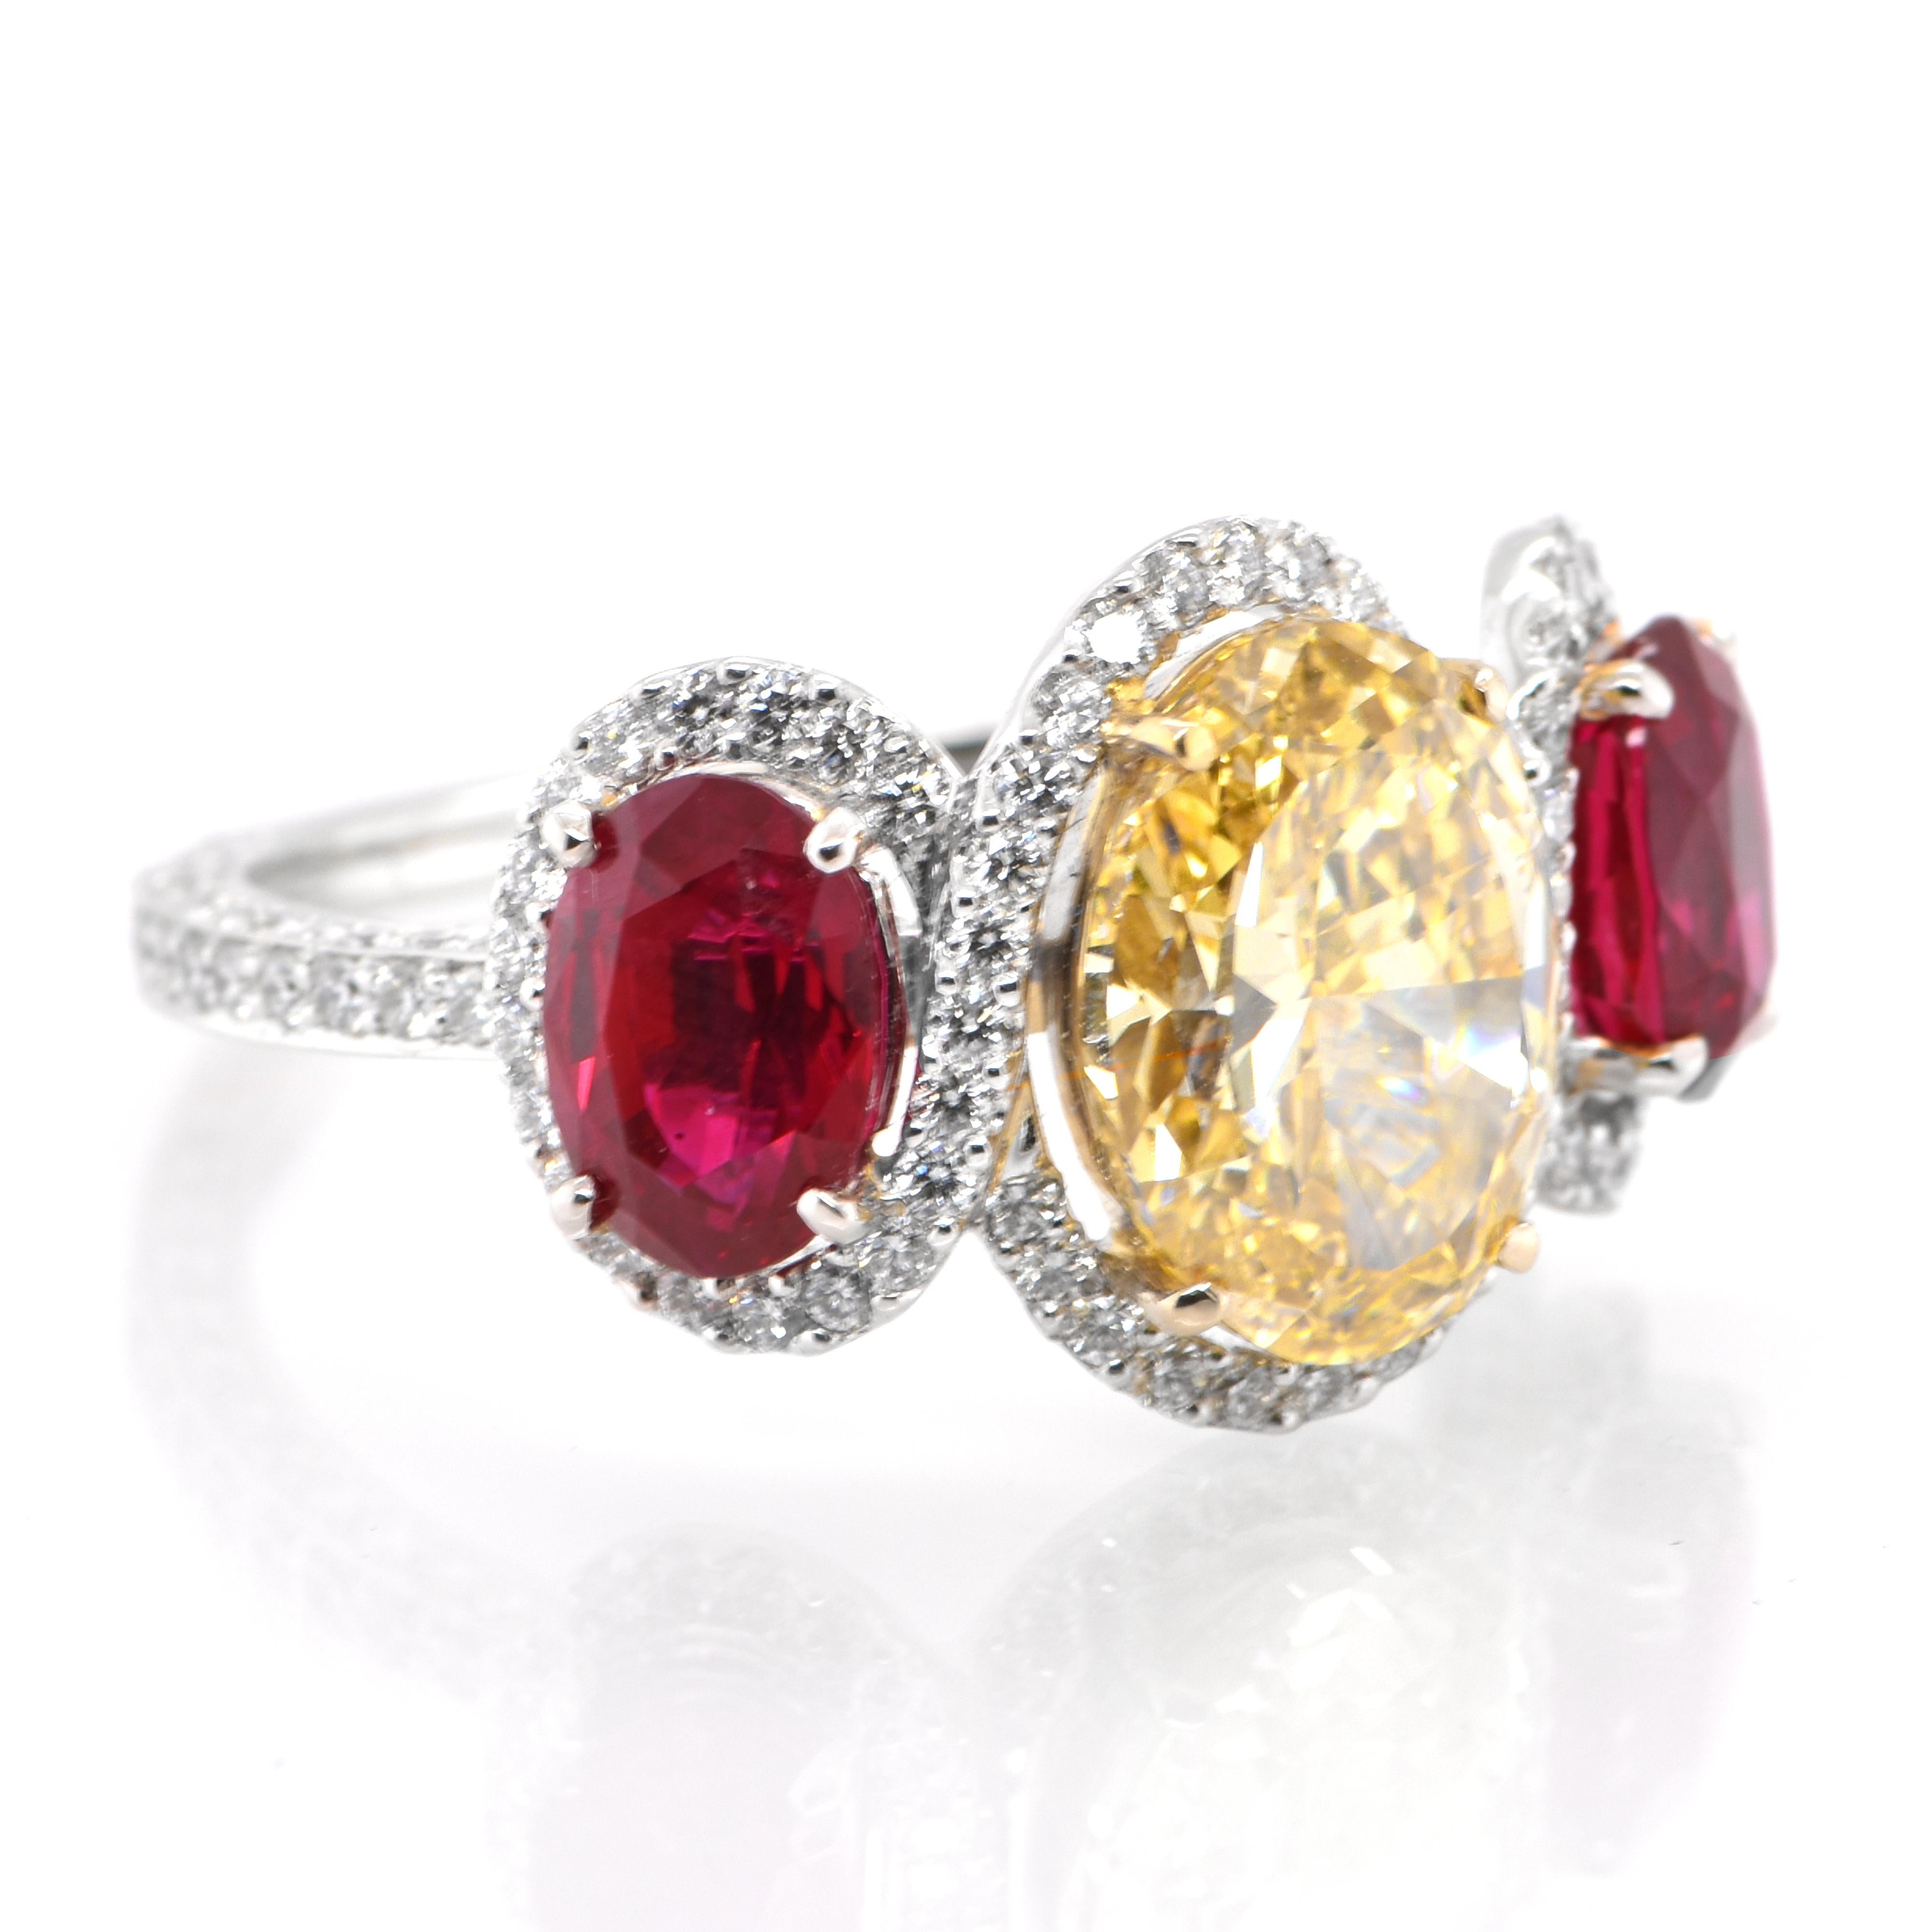 Modern 2.41 Carat Natural Fancy Brownish Yellow Diamond and Ruby Ring Set in Platinum